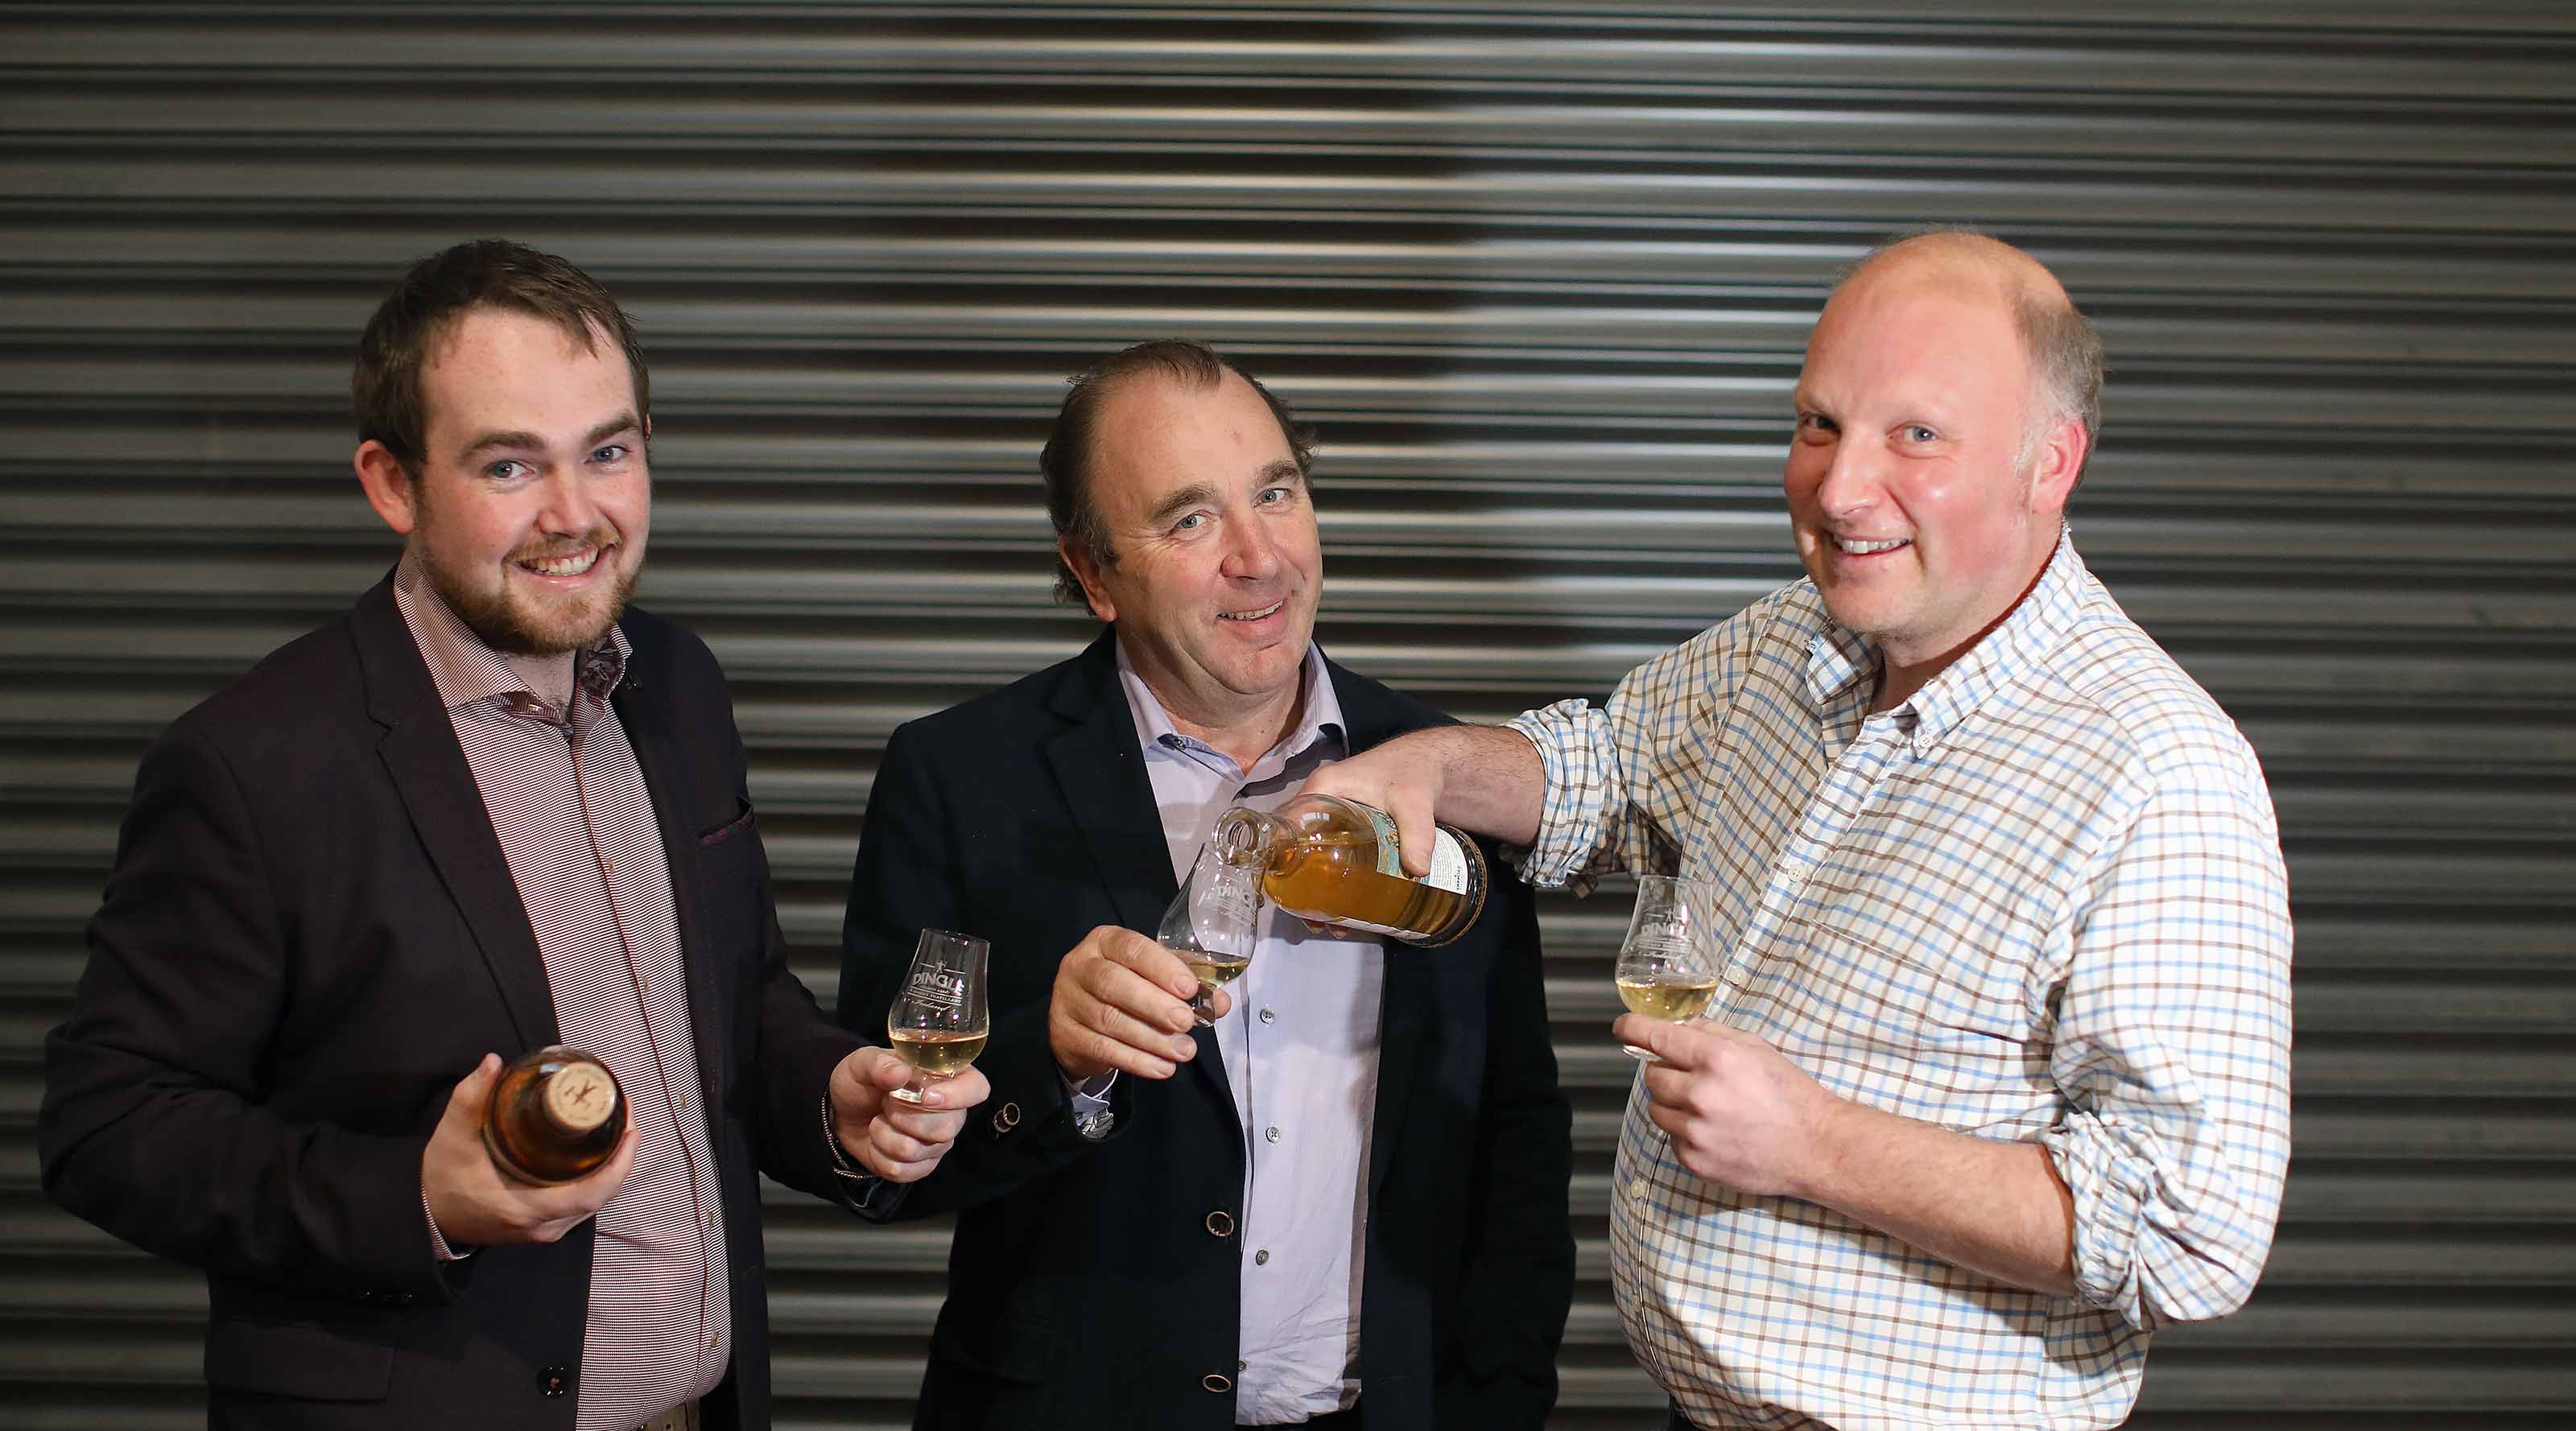 From left: Business Development Director Elliot Hughes with Managing Director Liam LaHart and Head Brewer and Director Peter Mosley.